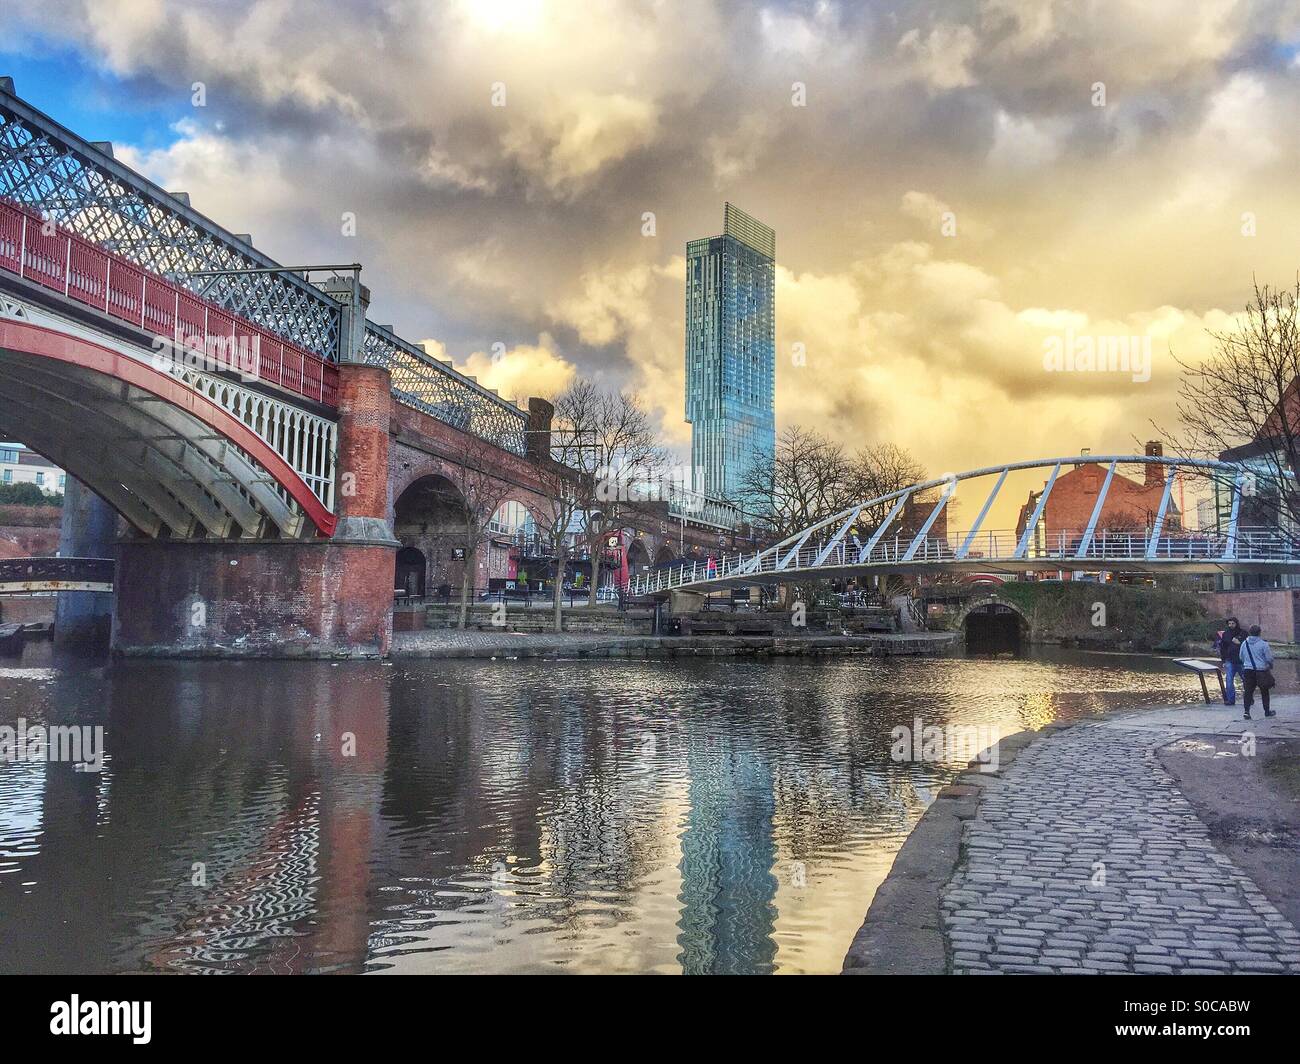 castlefield-canal-manchester-S0CABW.jpg